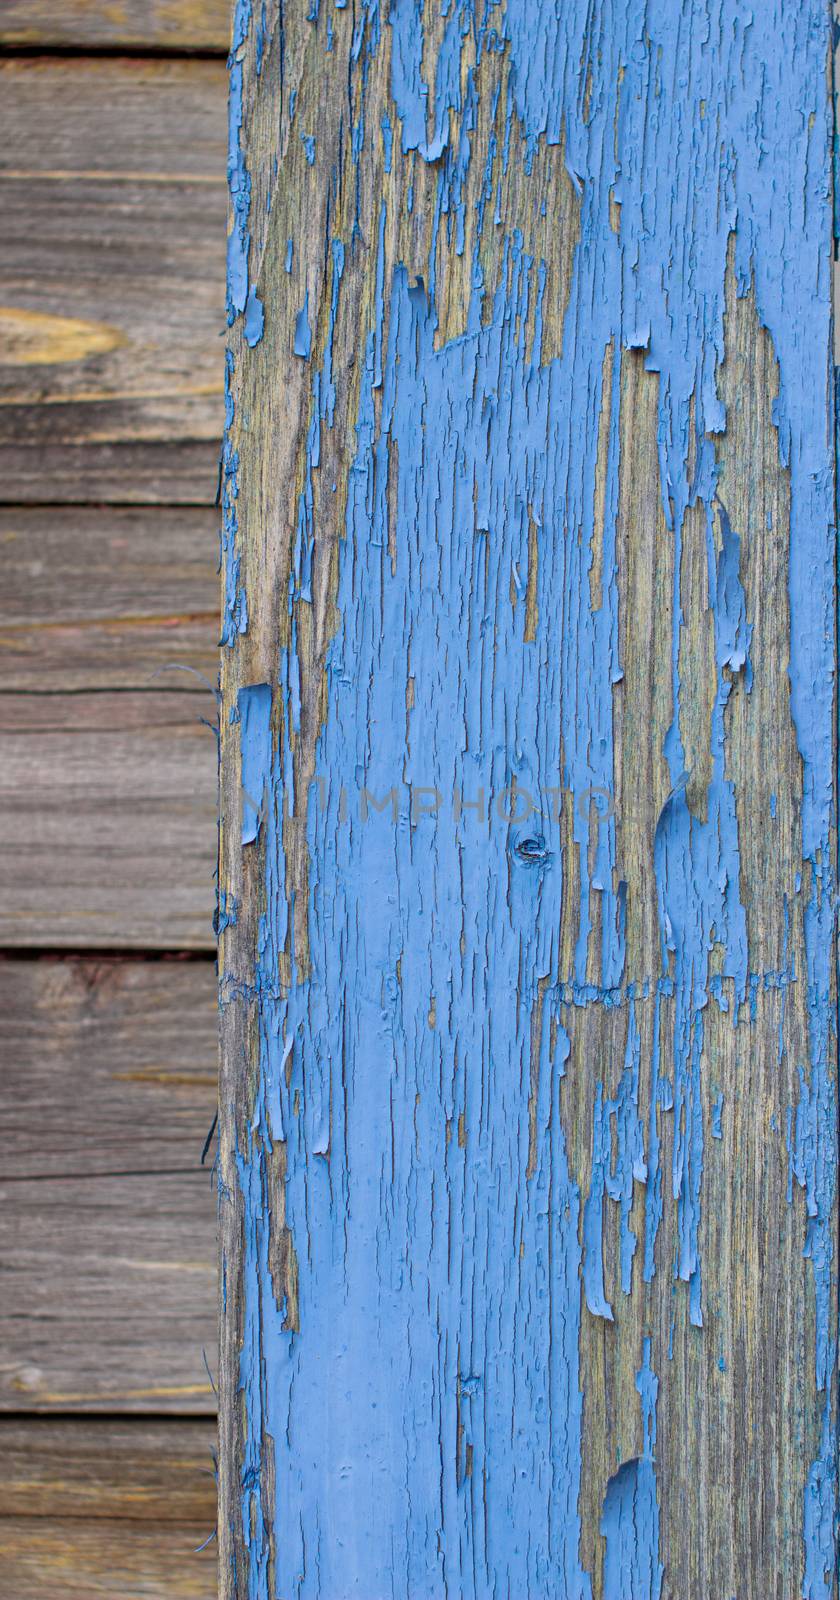 Blue old paint on the Board. Wooden background made of old boards. The texture of an old rustic wooden fence made of flat processed boards. Background design